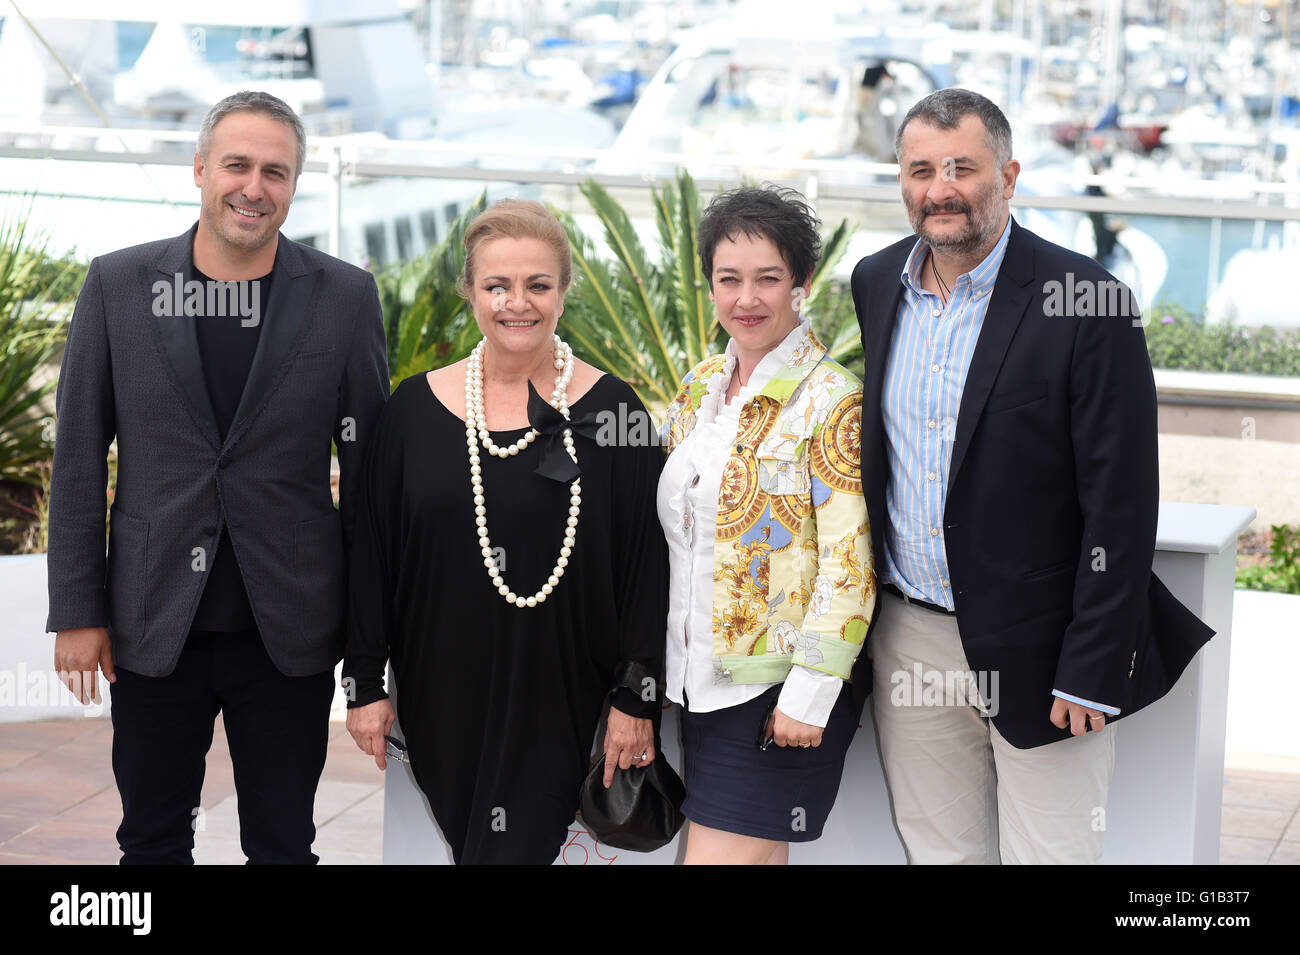 Cannes, France. 12th May, 2016. Actor Mimi Branescu, (l-r) actress Dana Dogaru, producer Anca Puiu and director Cristi Puiu attends at the photocall 'Sieranevada (Roumanie)' at the 69th Annual Cannes Film Festival at Palais des Festivals in Cannes, France, on 12 May 2016. Credit:  dpa picture alliance/Alamy Live News Stock Photo